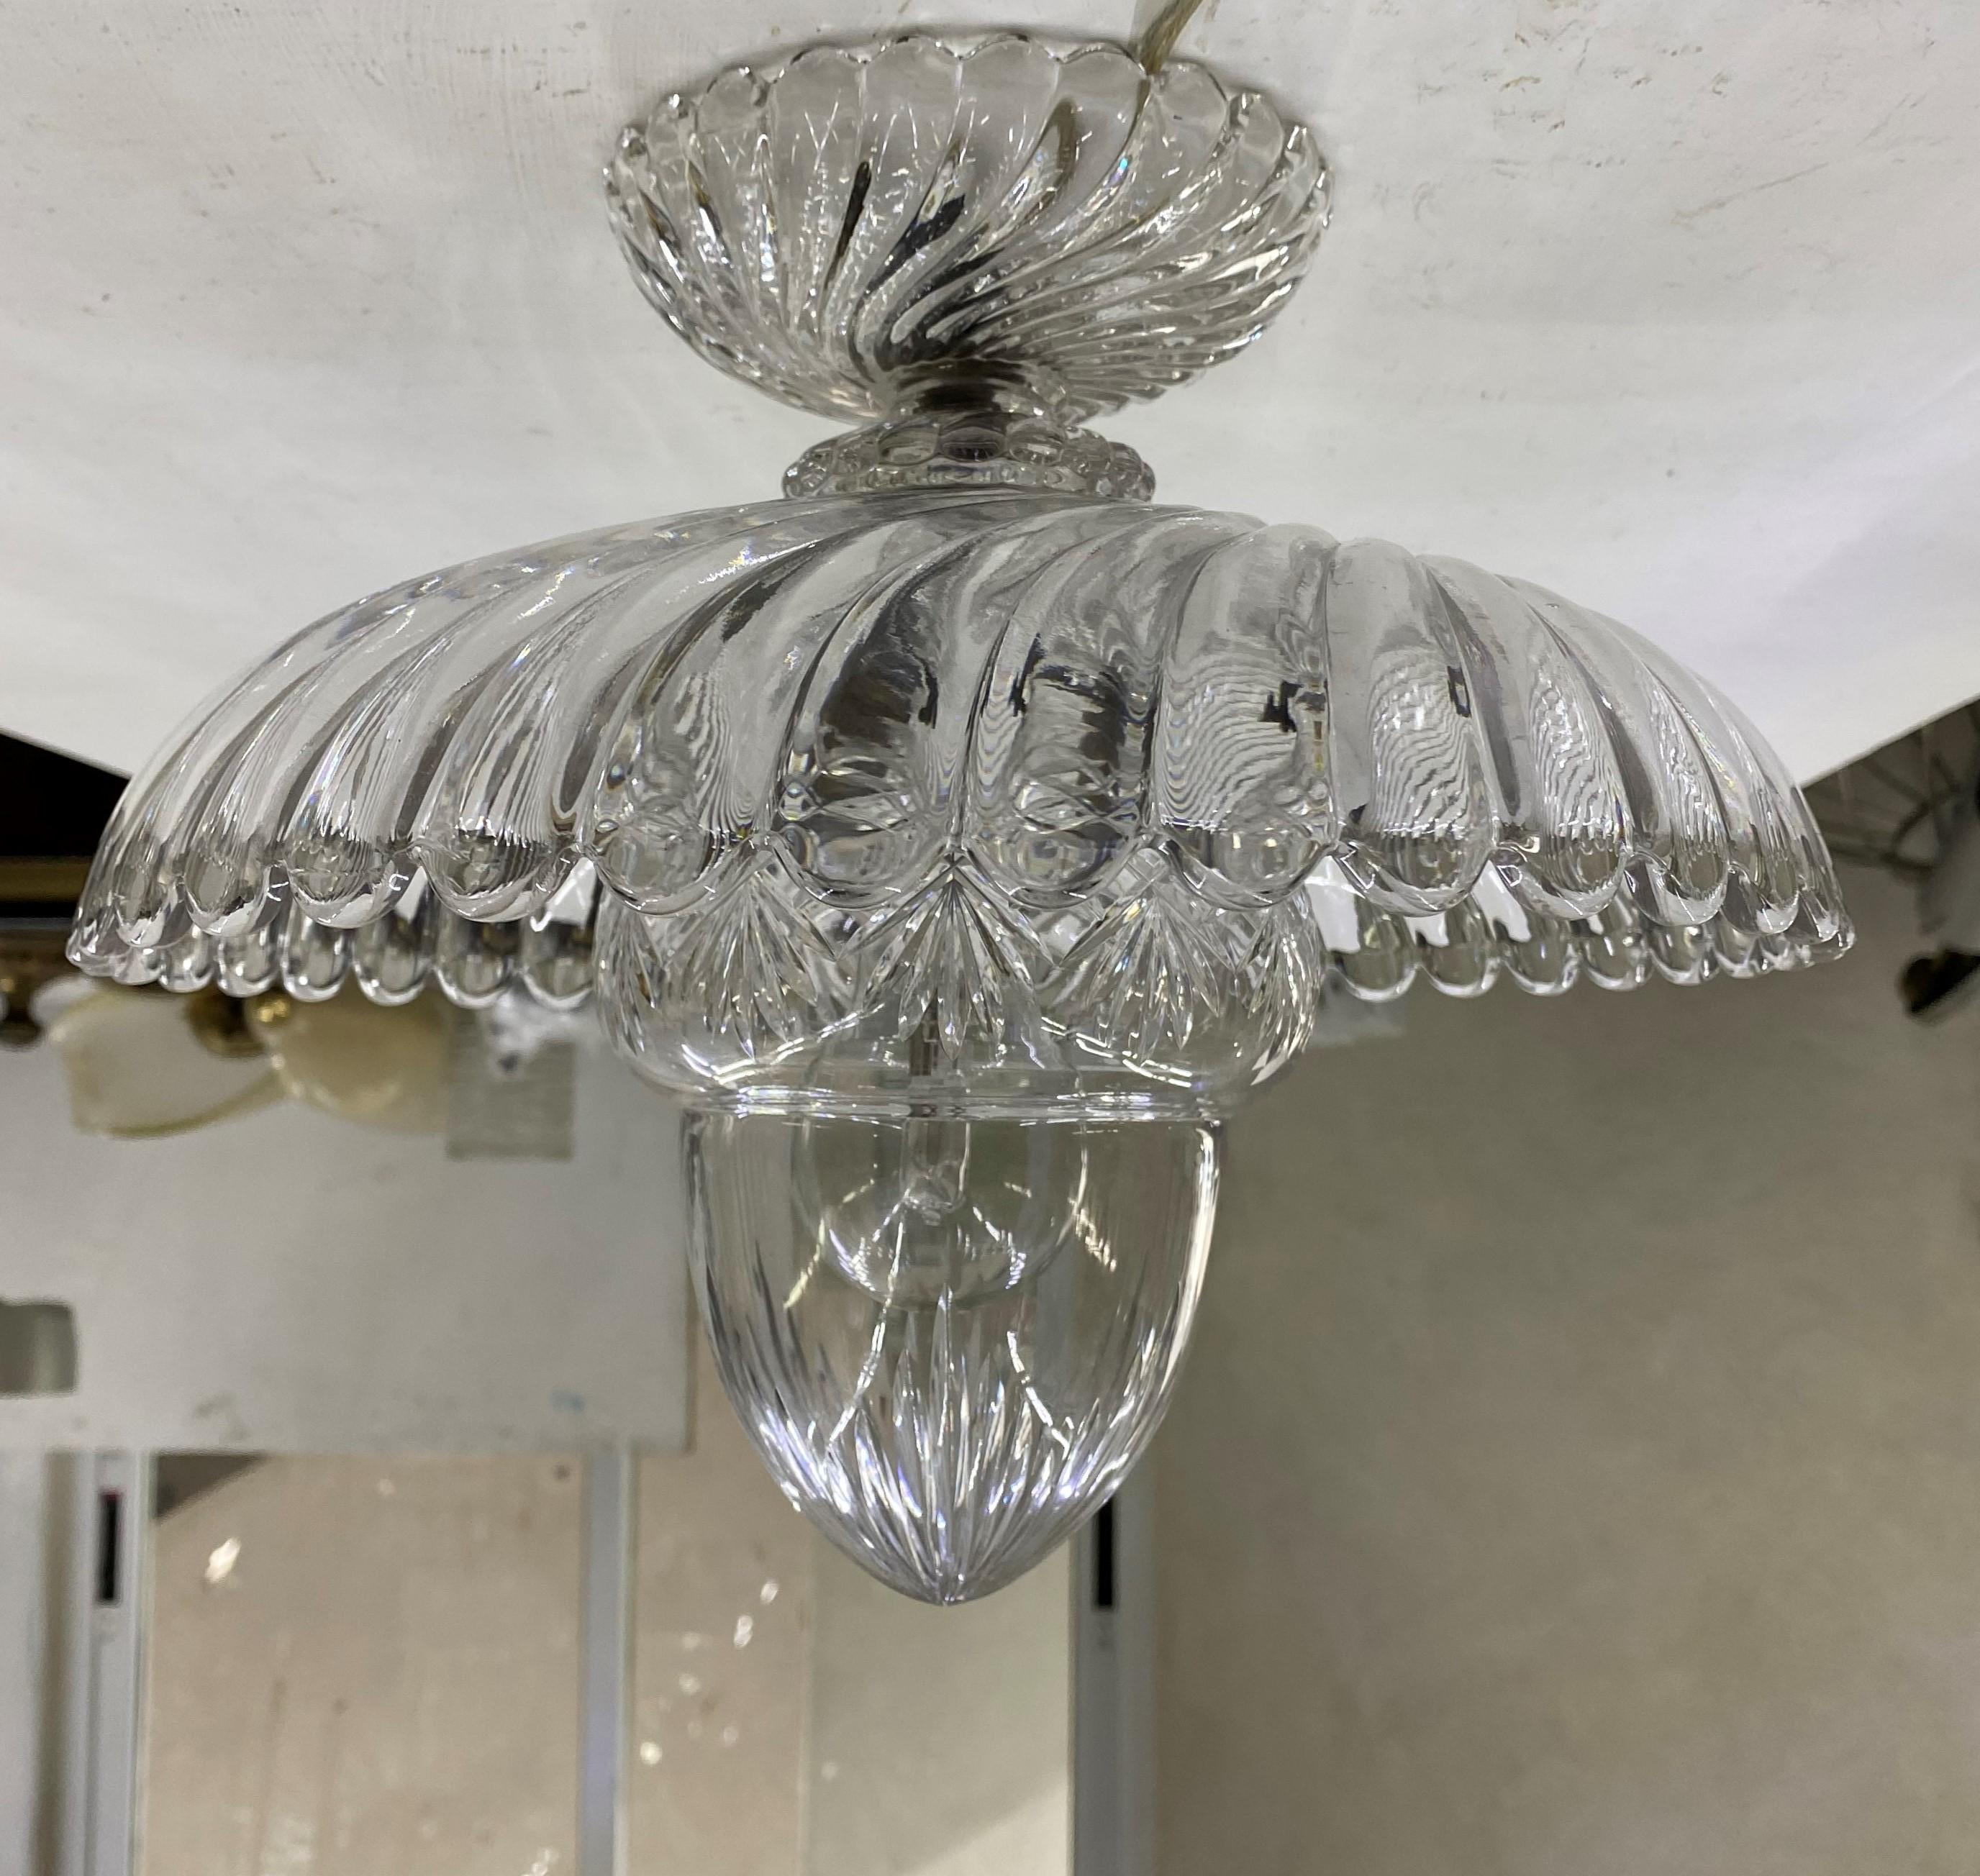 Charming chandelier with handcut central globe, most likely made by Baccarat in France, circa 1930-1940, in bronze and moulded and handcut lead crystal.
This light can be installed as a flush mount or hung from a chain if so desired.